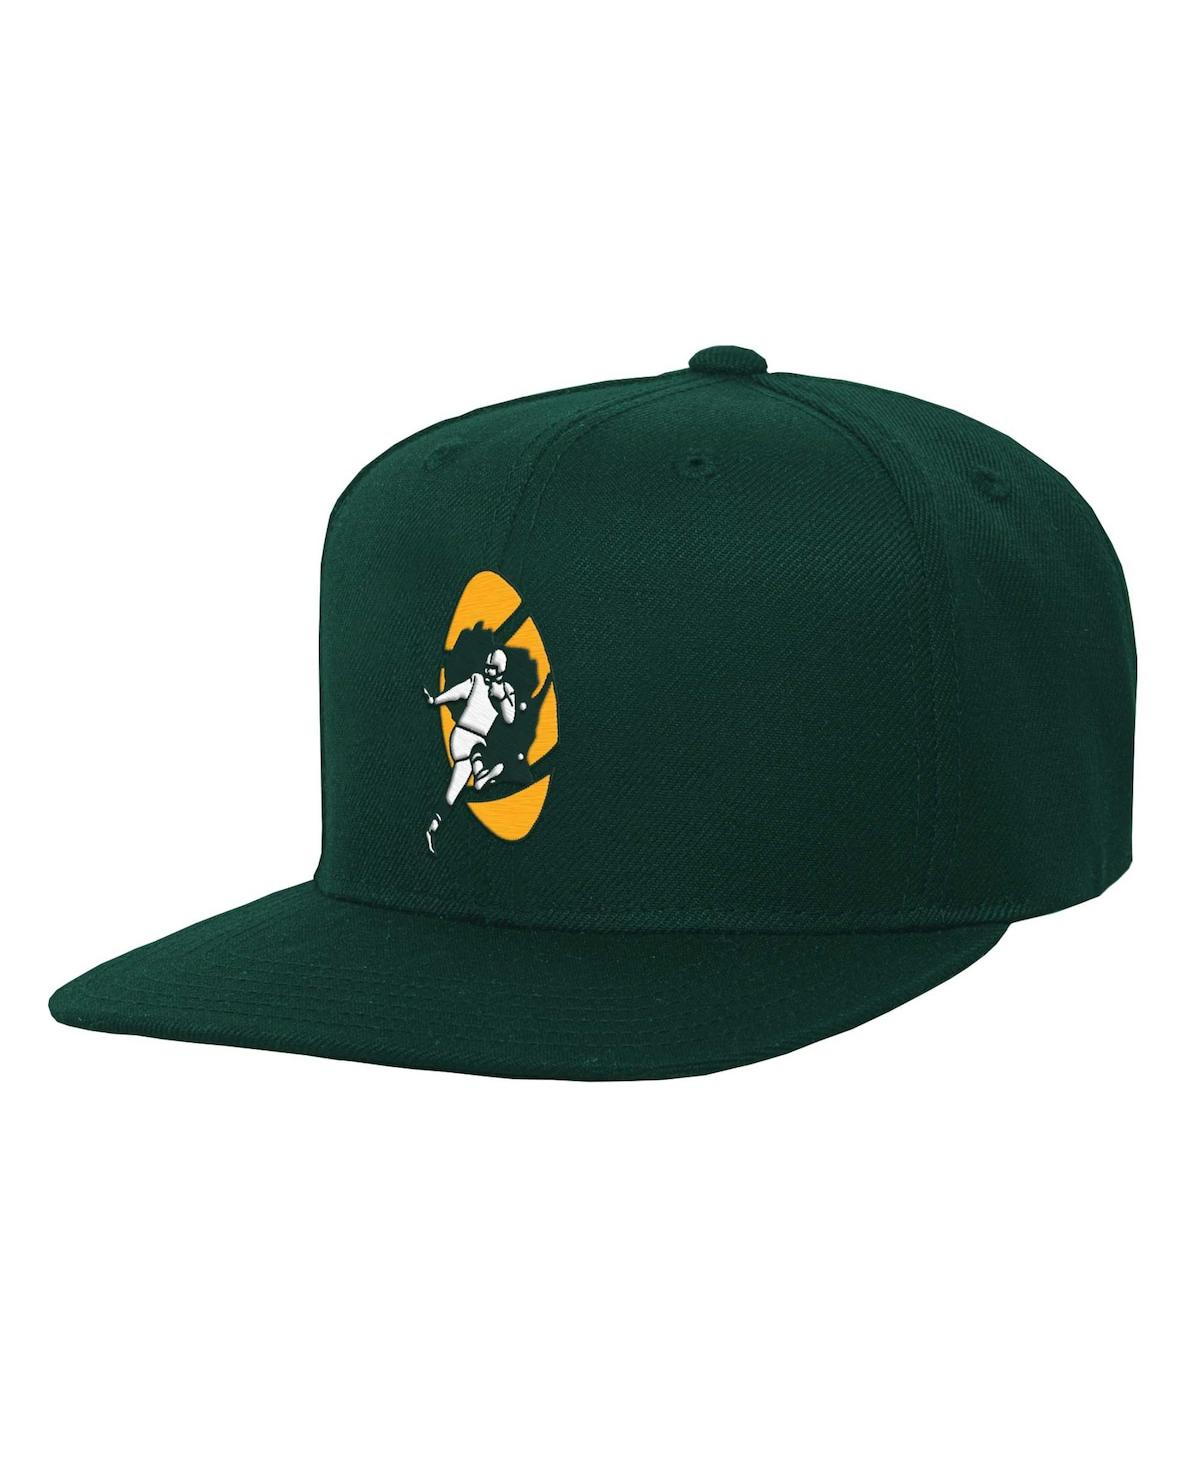 Shop Mitchell & Ness Big Boys And Girls  Green Green Bay Packers Gridiron Classics Ground Snapback Hat